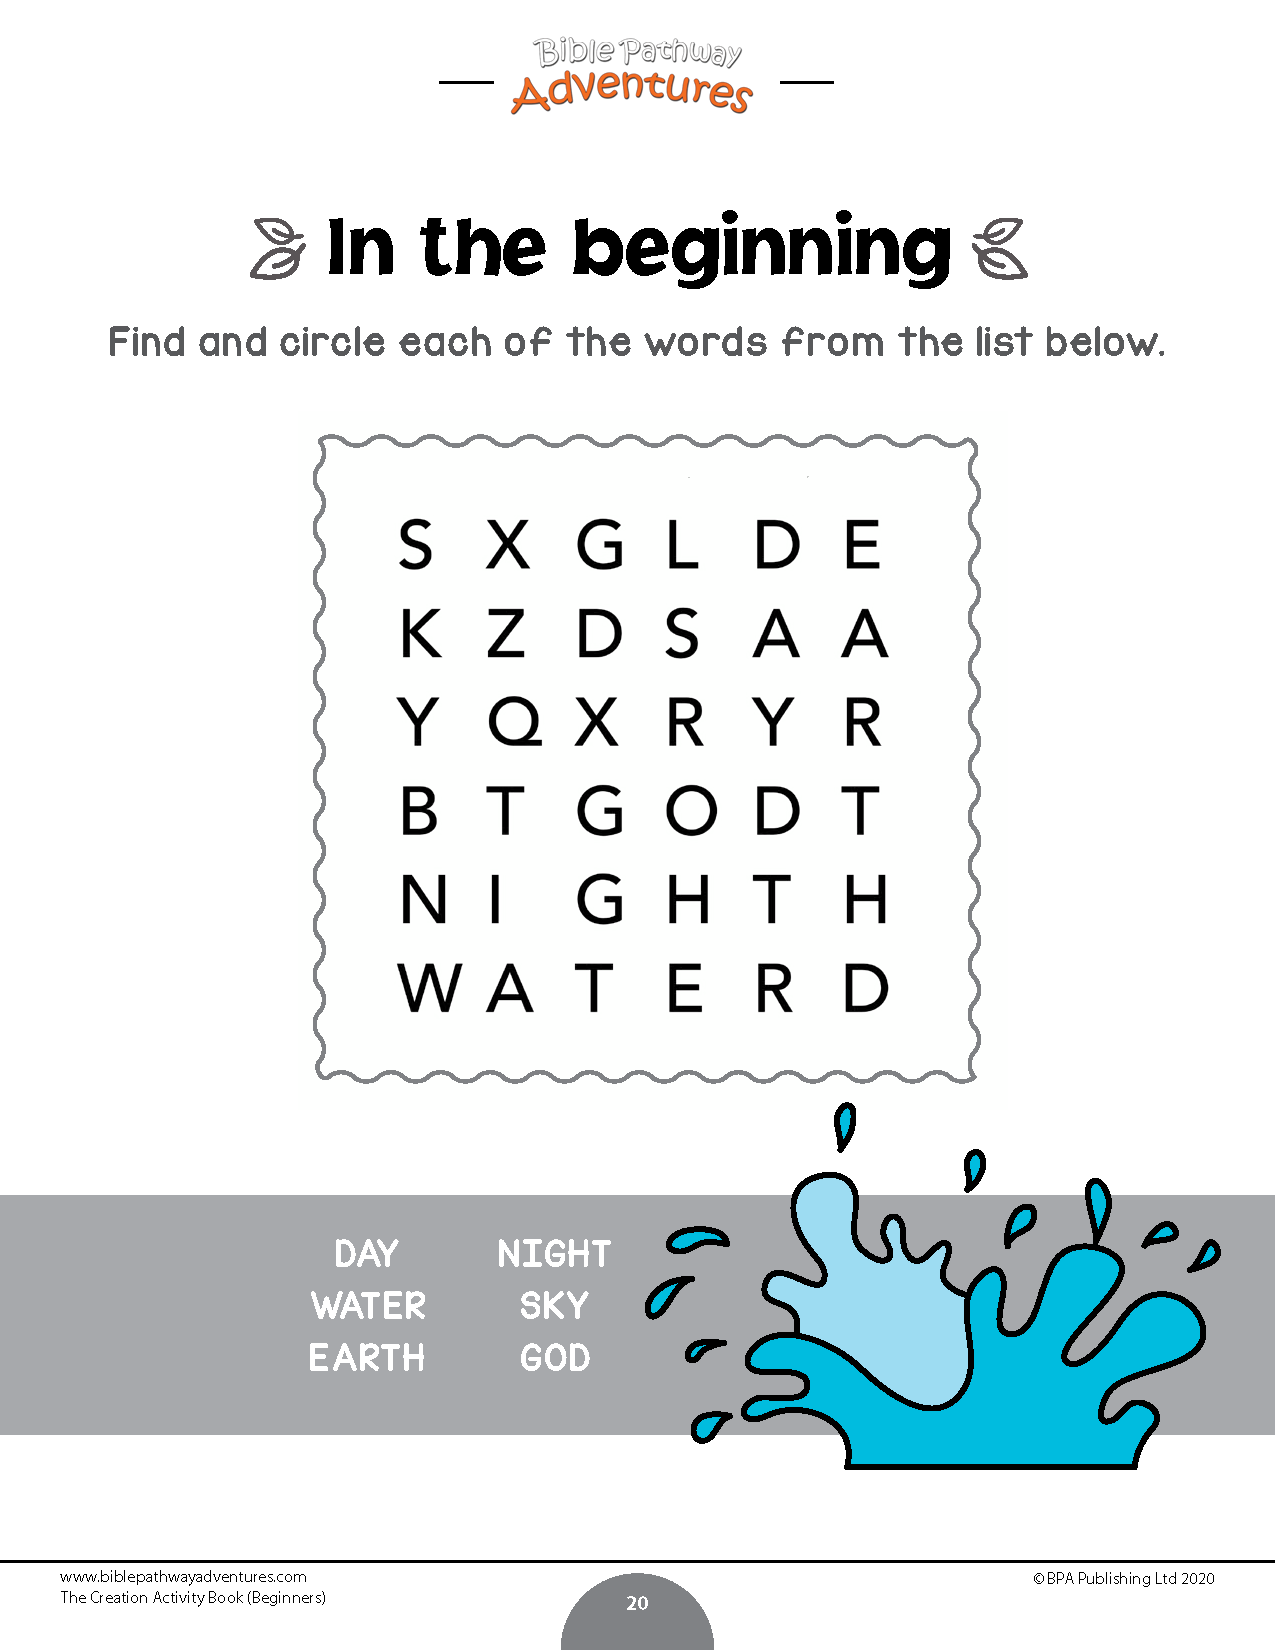 The Creation Activity Book for Beginners (PDF)